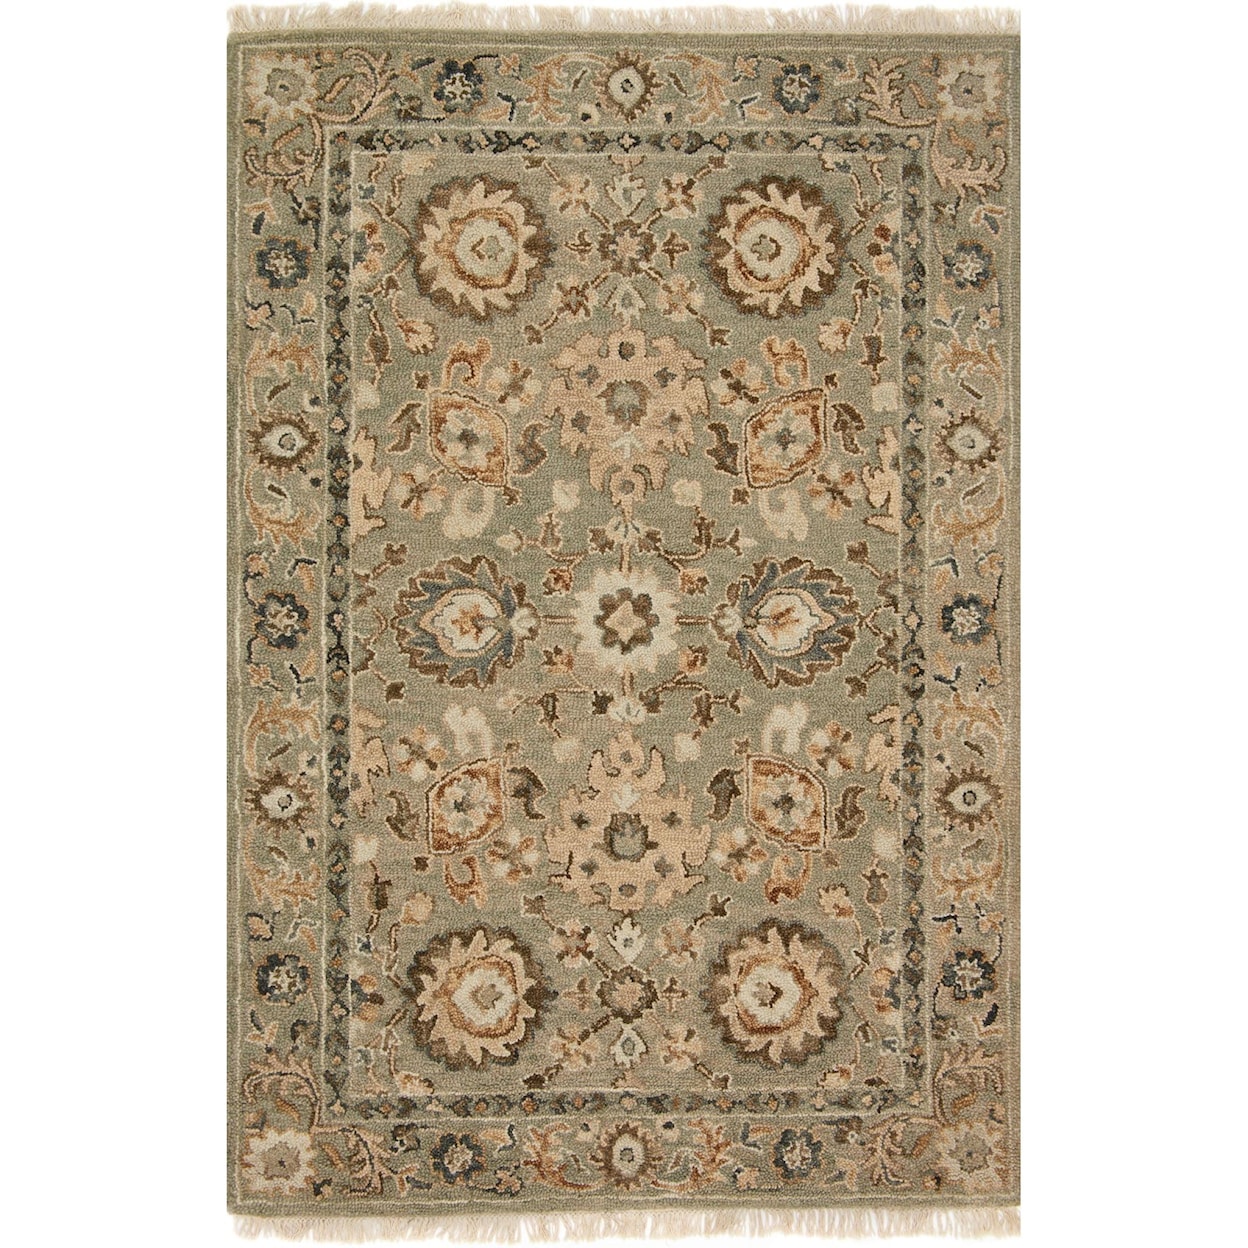 Magnolia Home by Joanna Gaines for Loloi Hanover 2' 3" x 3' 9" Rectangle Rug